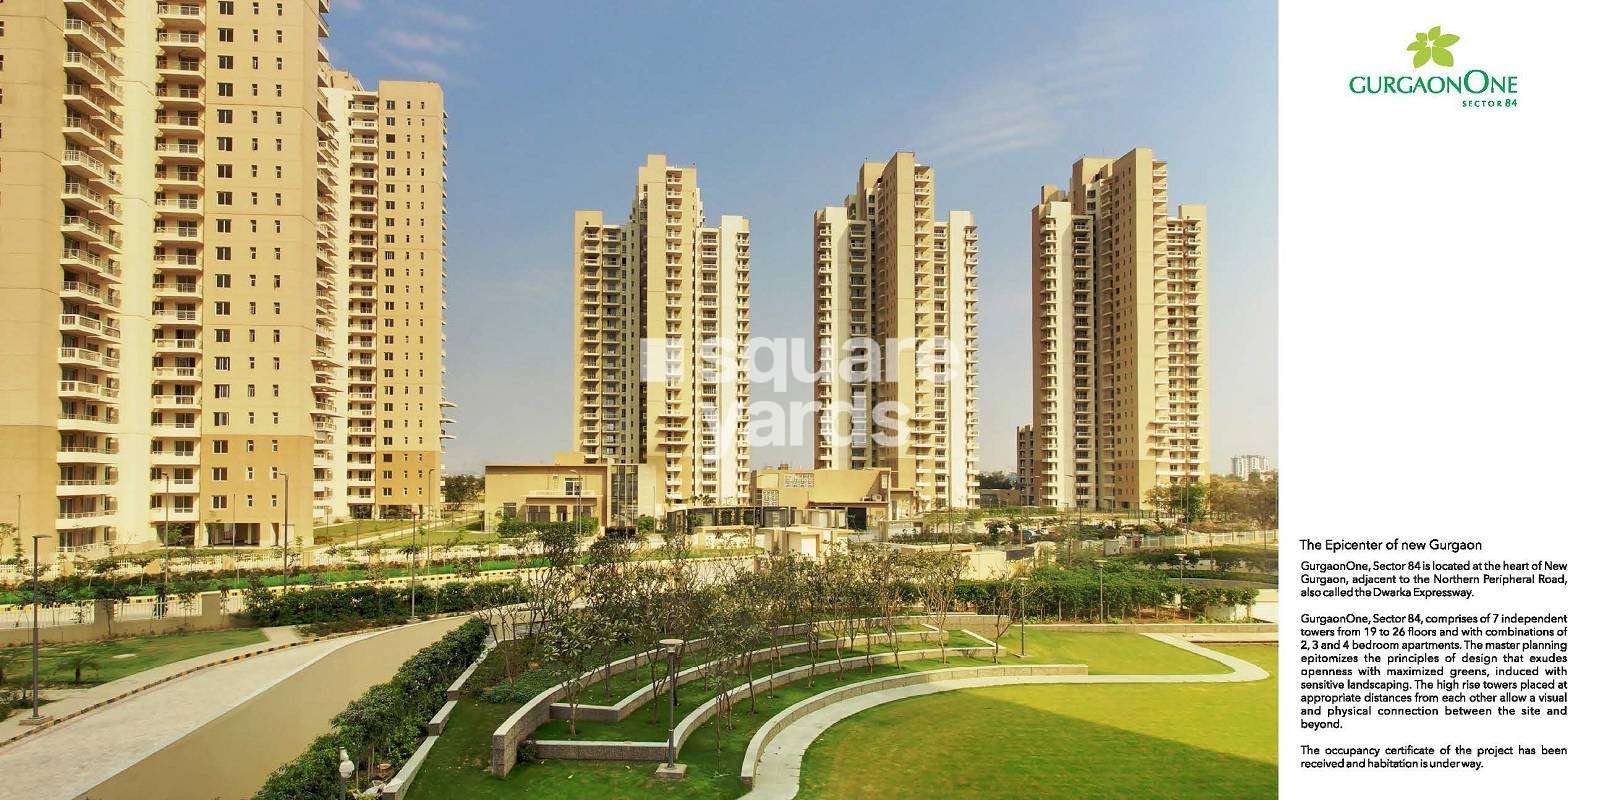 alpha g corp gurgaon one 84 tower view10